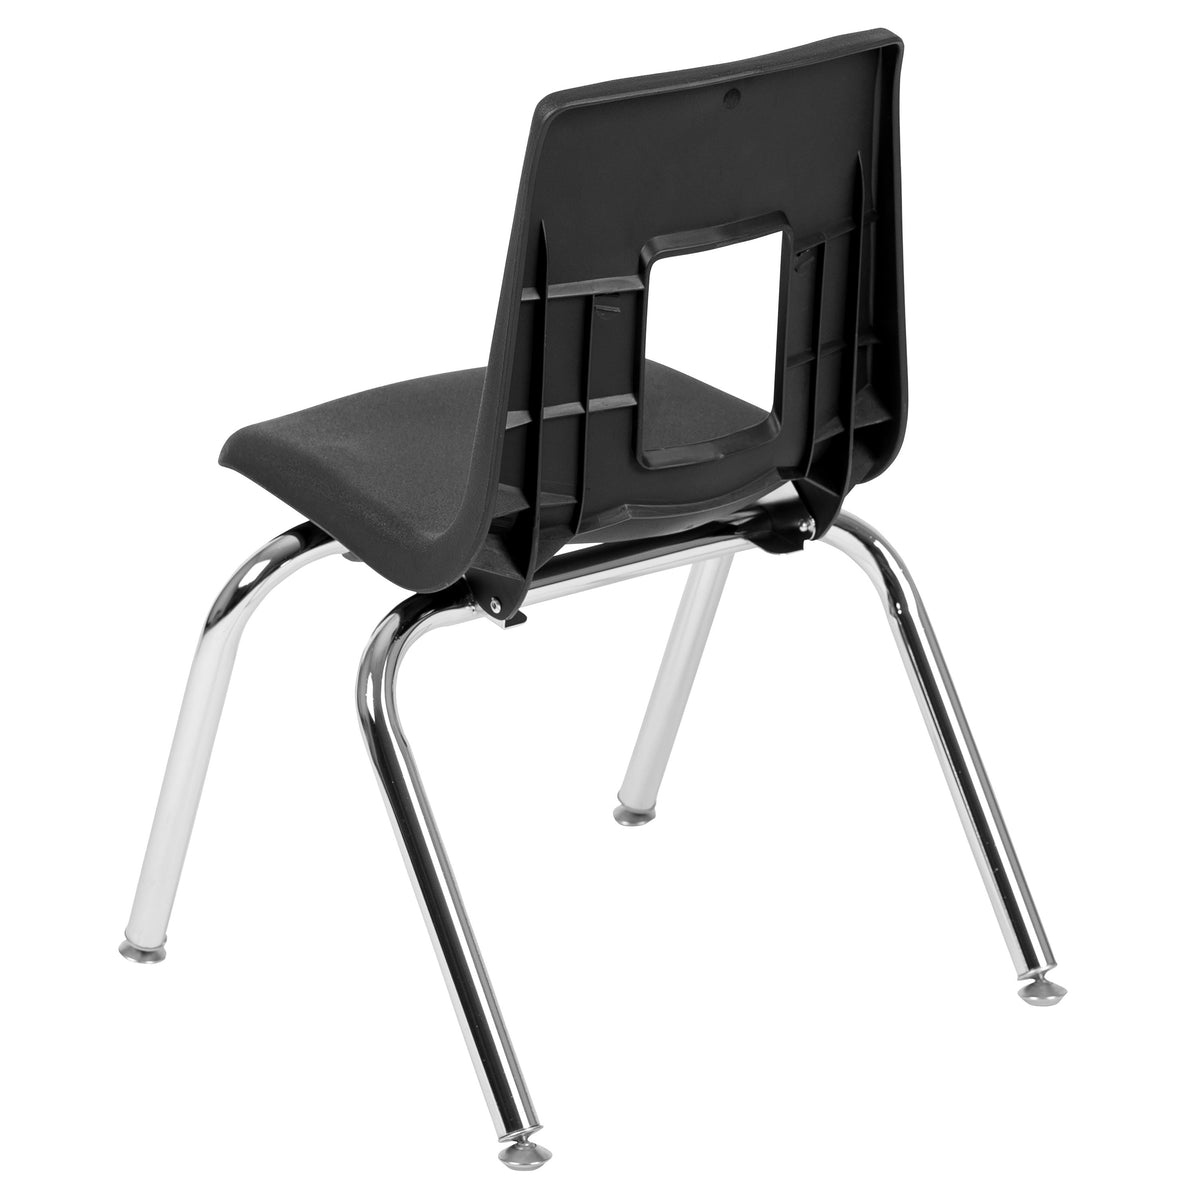 Black |#| Black Student Stack Chair 14inchH Seat - School Classroom Chair for K-2